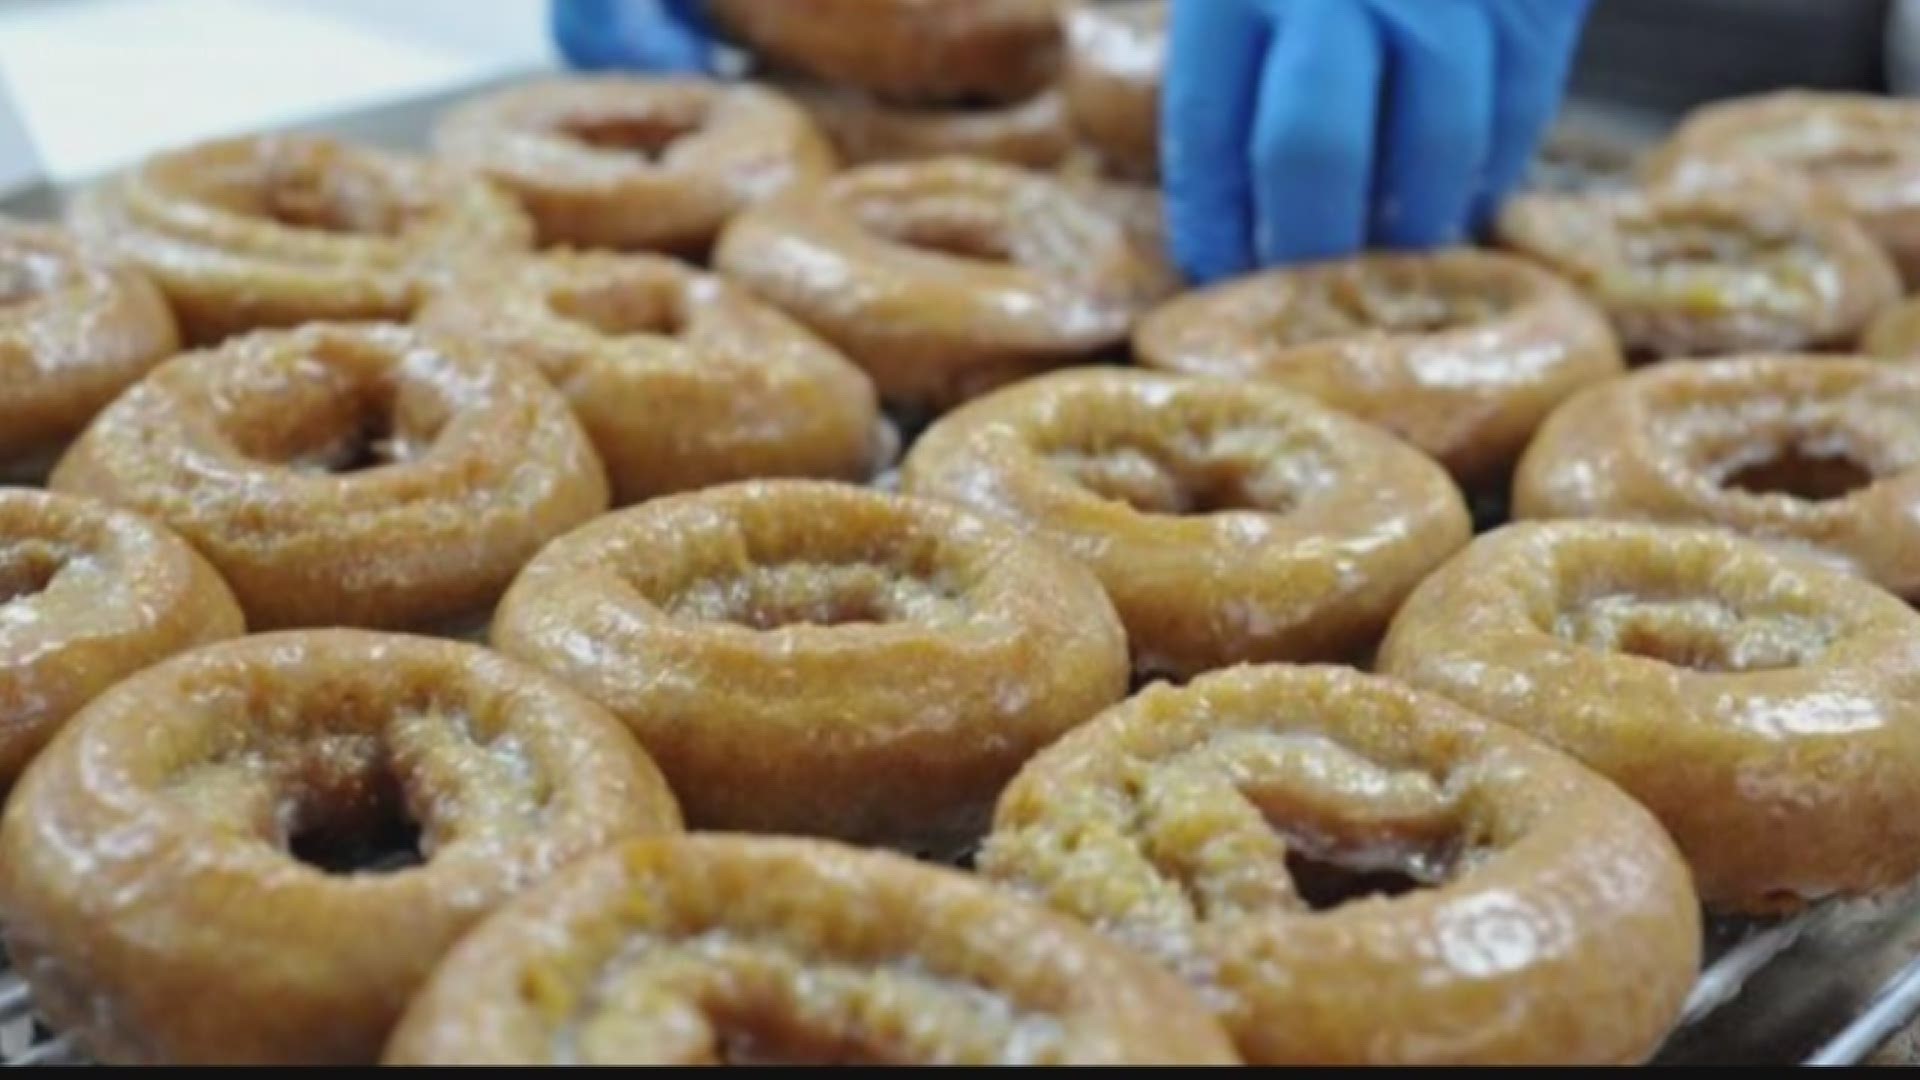 A second donut, rolled in cinnamon sugar, is also available. Both are made with a secret spice mixture, a family recipe that only Mike Cinotti knows.